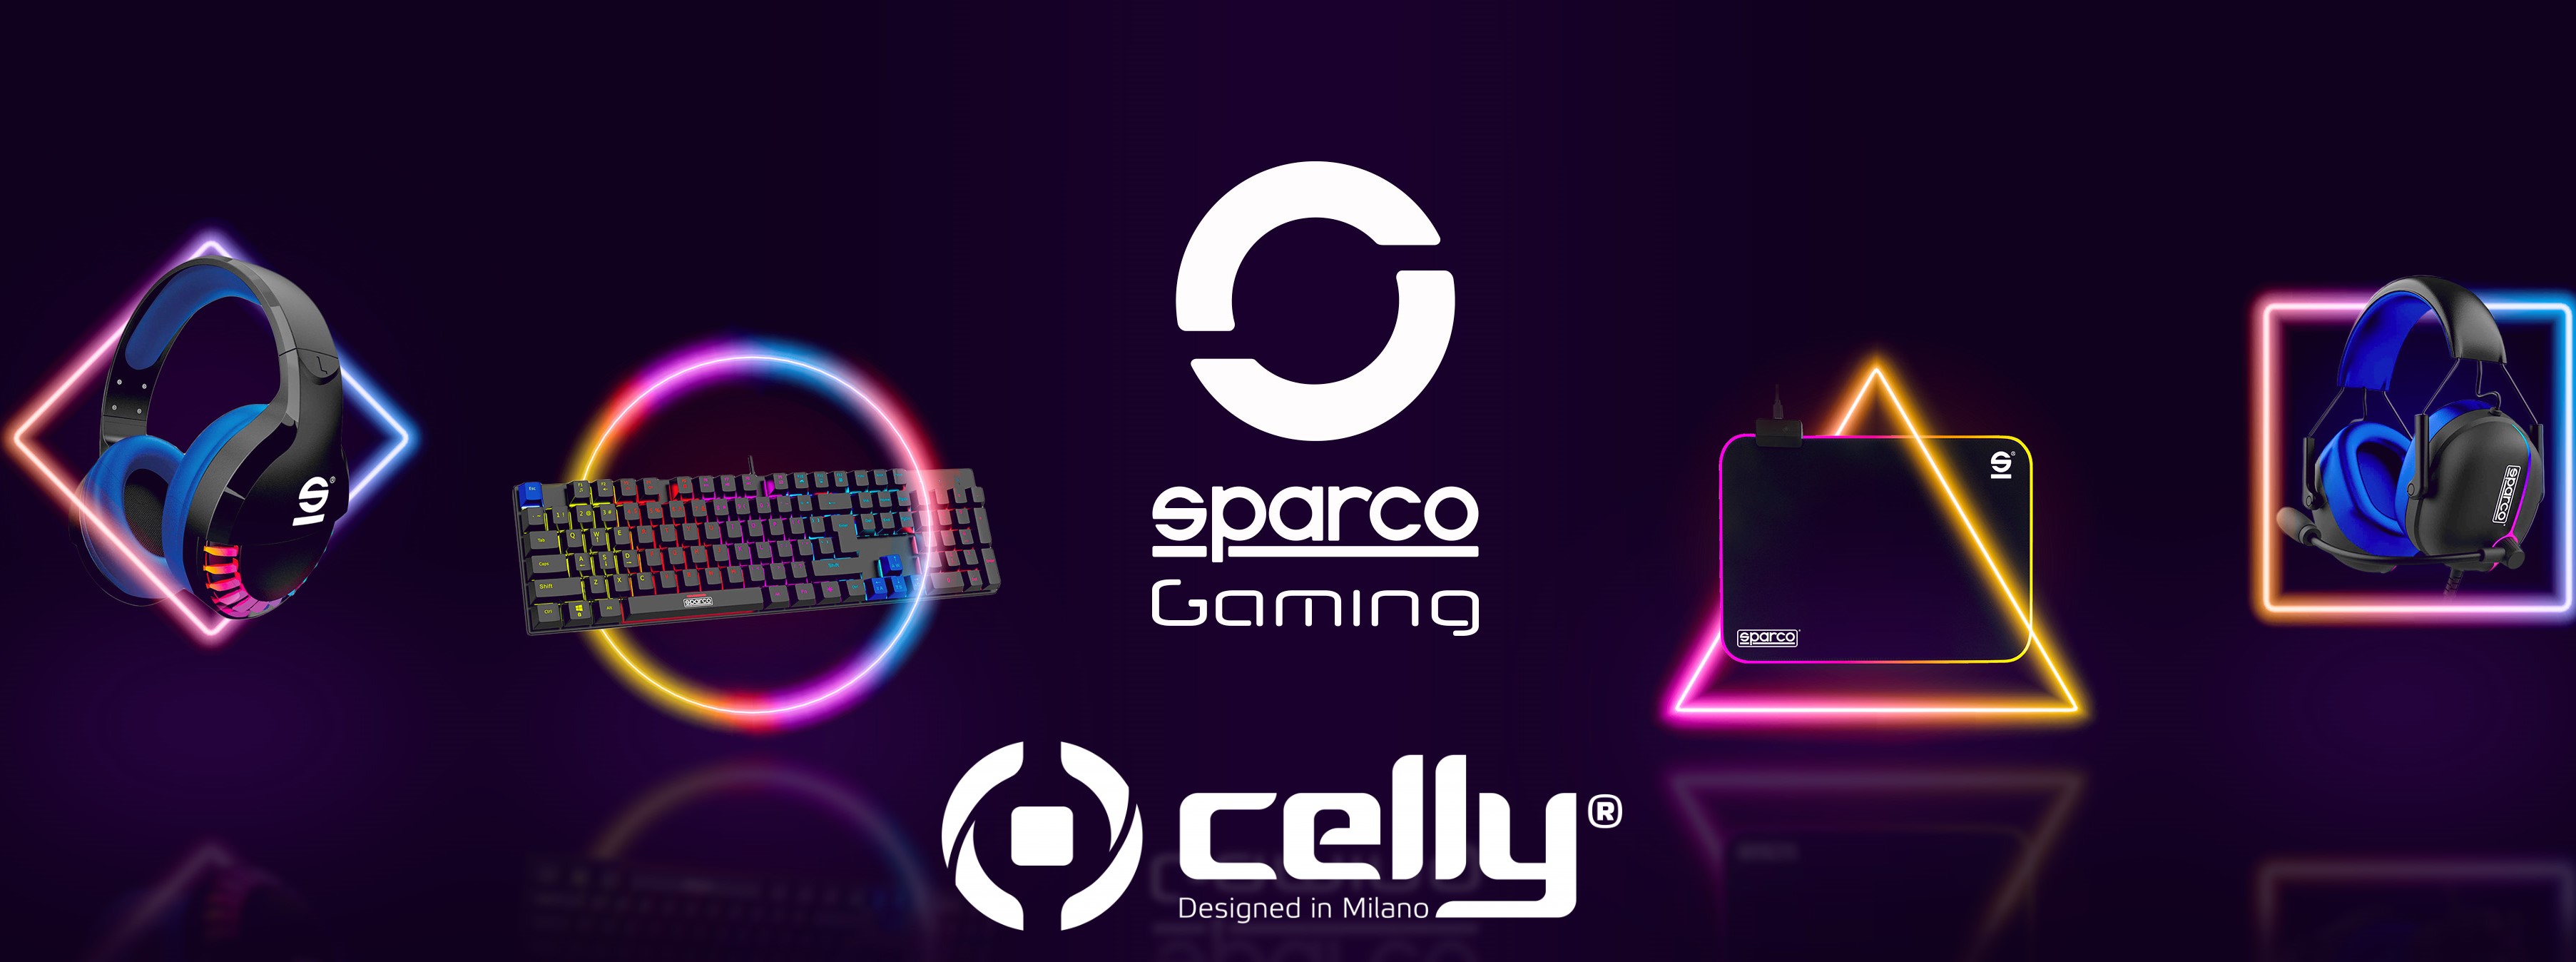 Celly Gaming Kit Sparco Recensione